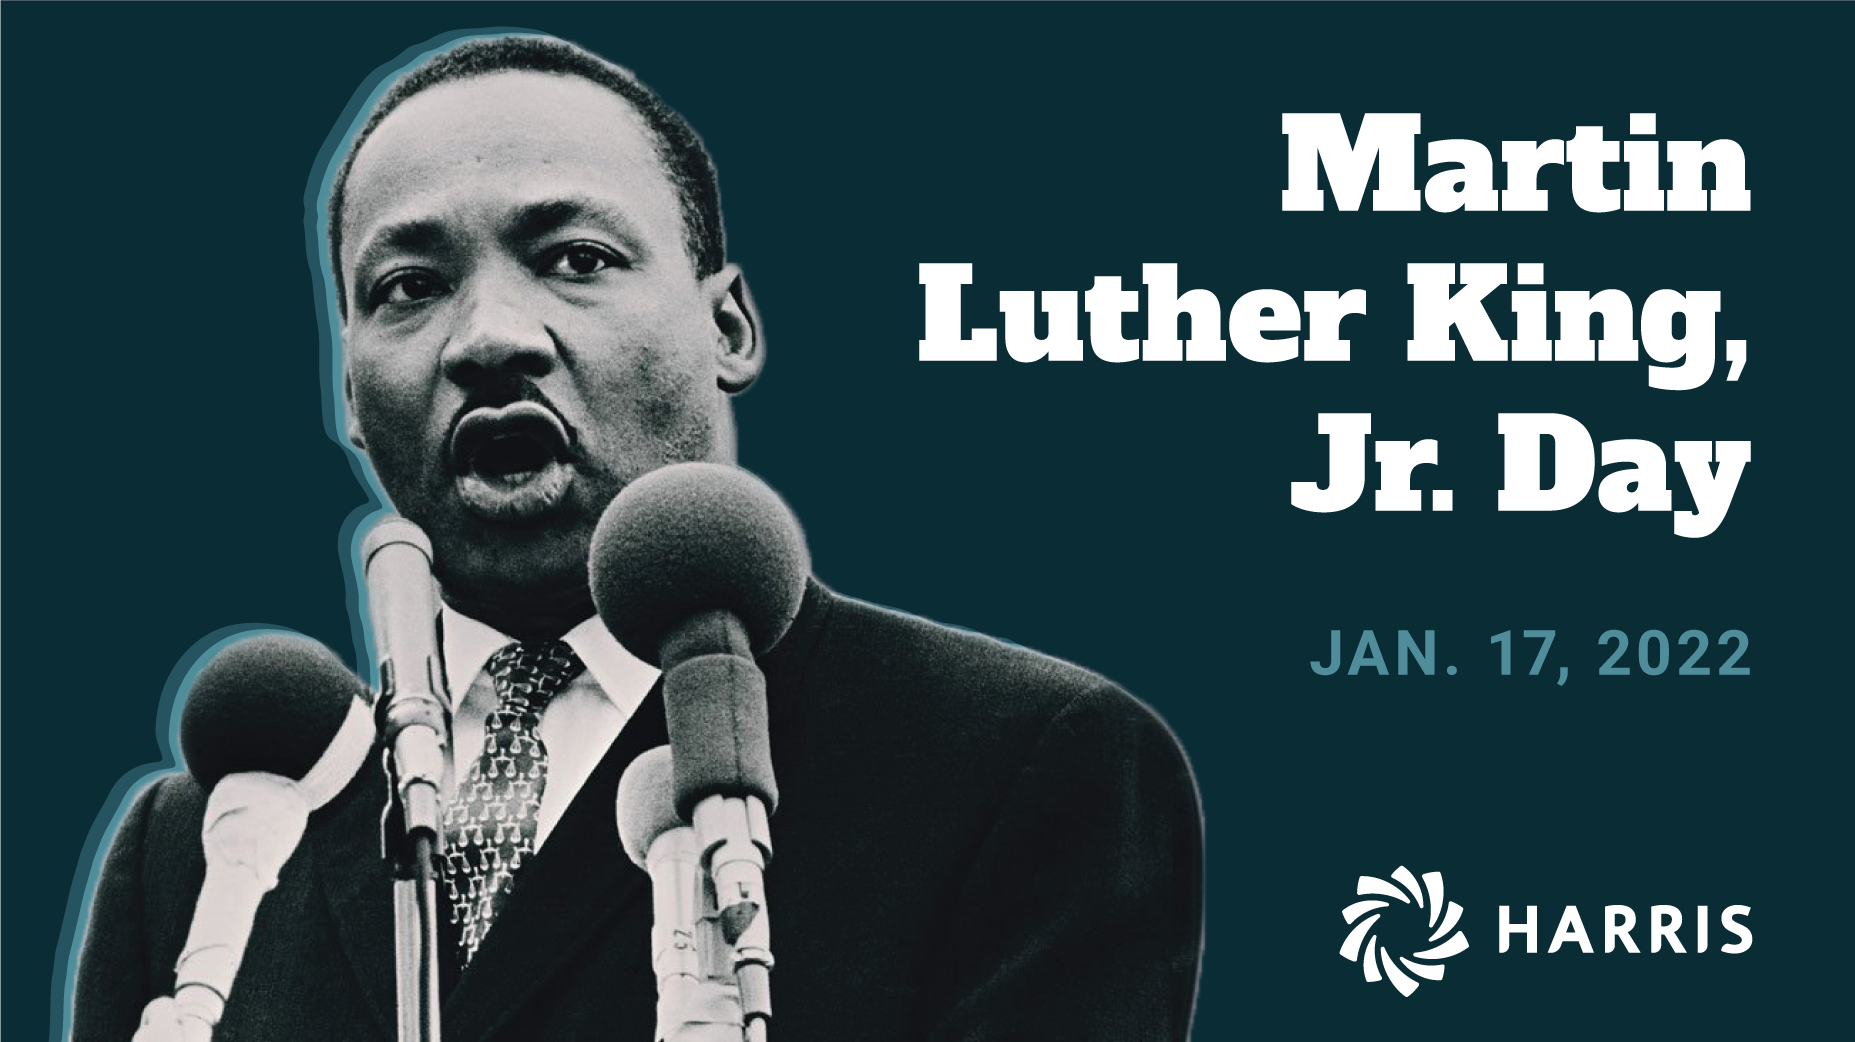 ABC News on X: Happy Martin Luther King, Jr. Day: The time is